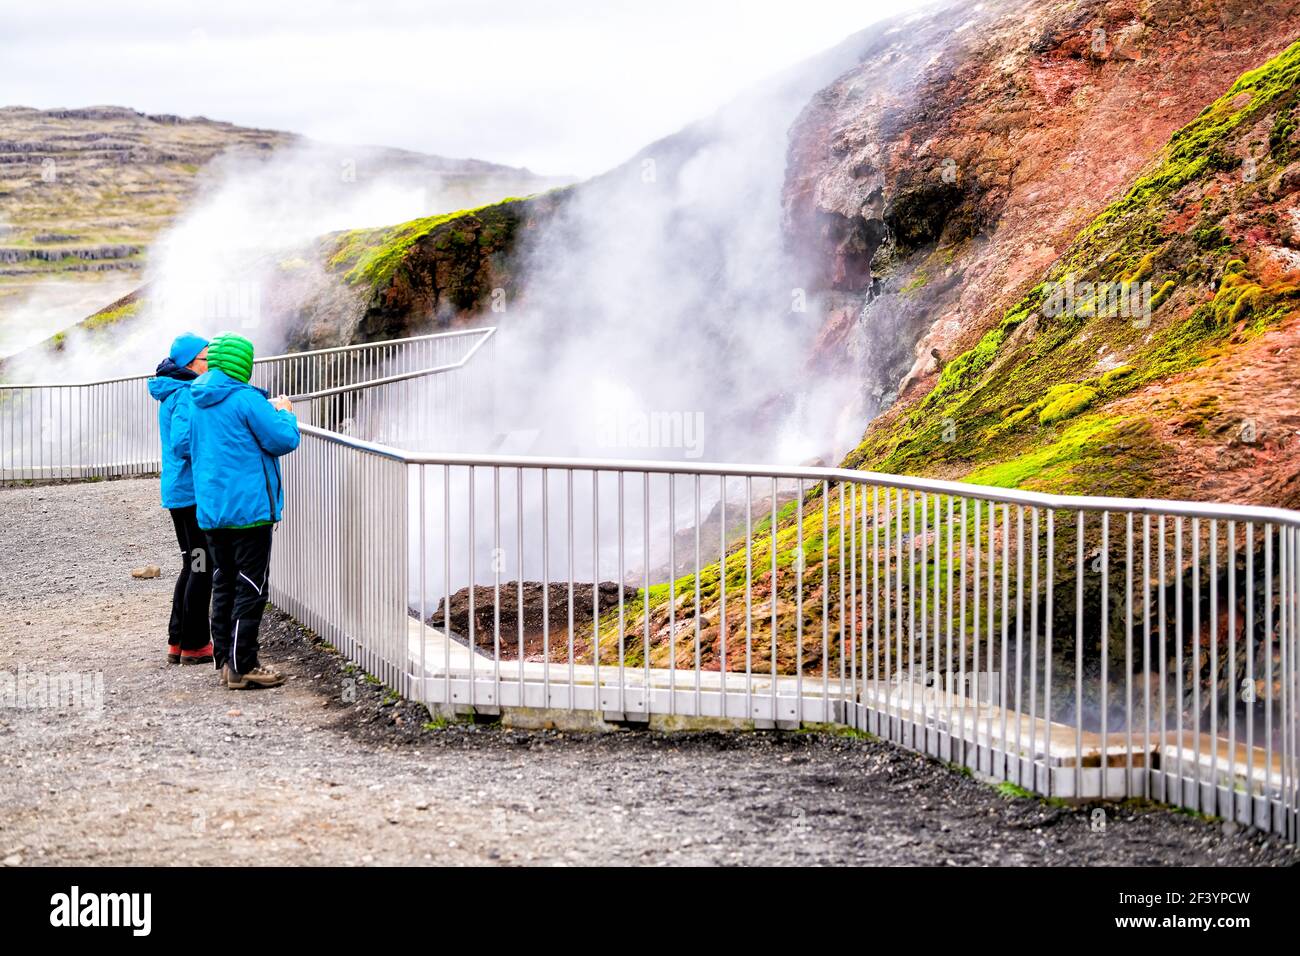 Deildartunguhver, Iceland - June 18, 2018: Hot springs and people looking at hot water outside in summer with vapor steam rising from cave Stock Photo